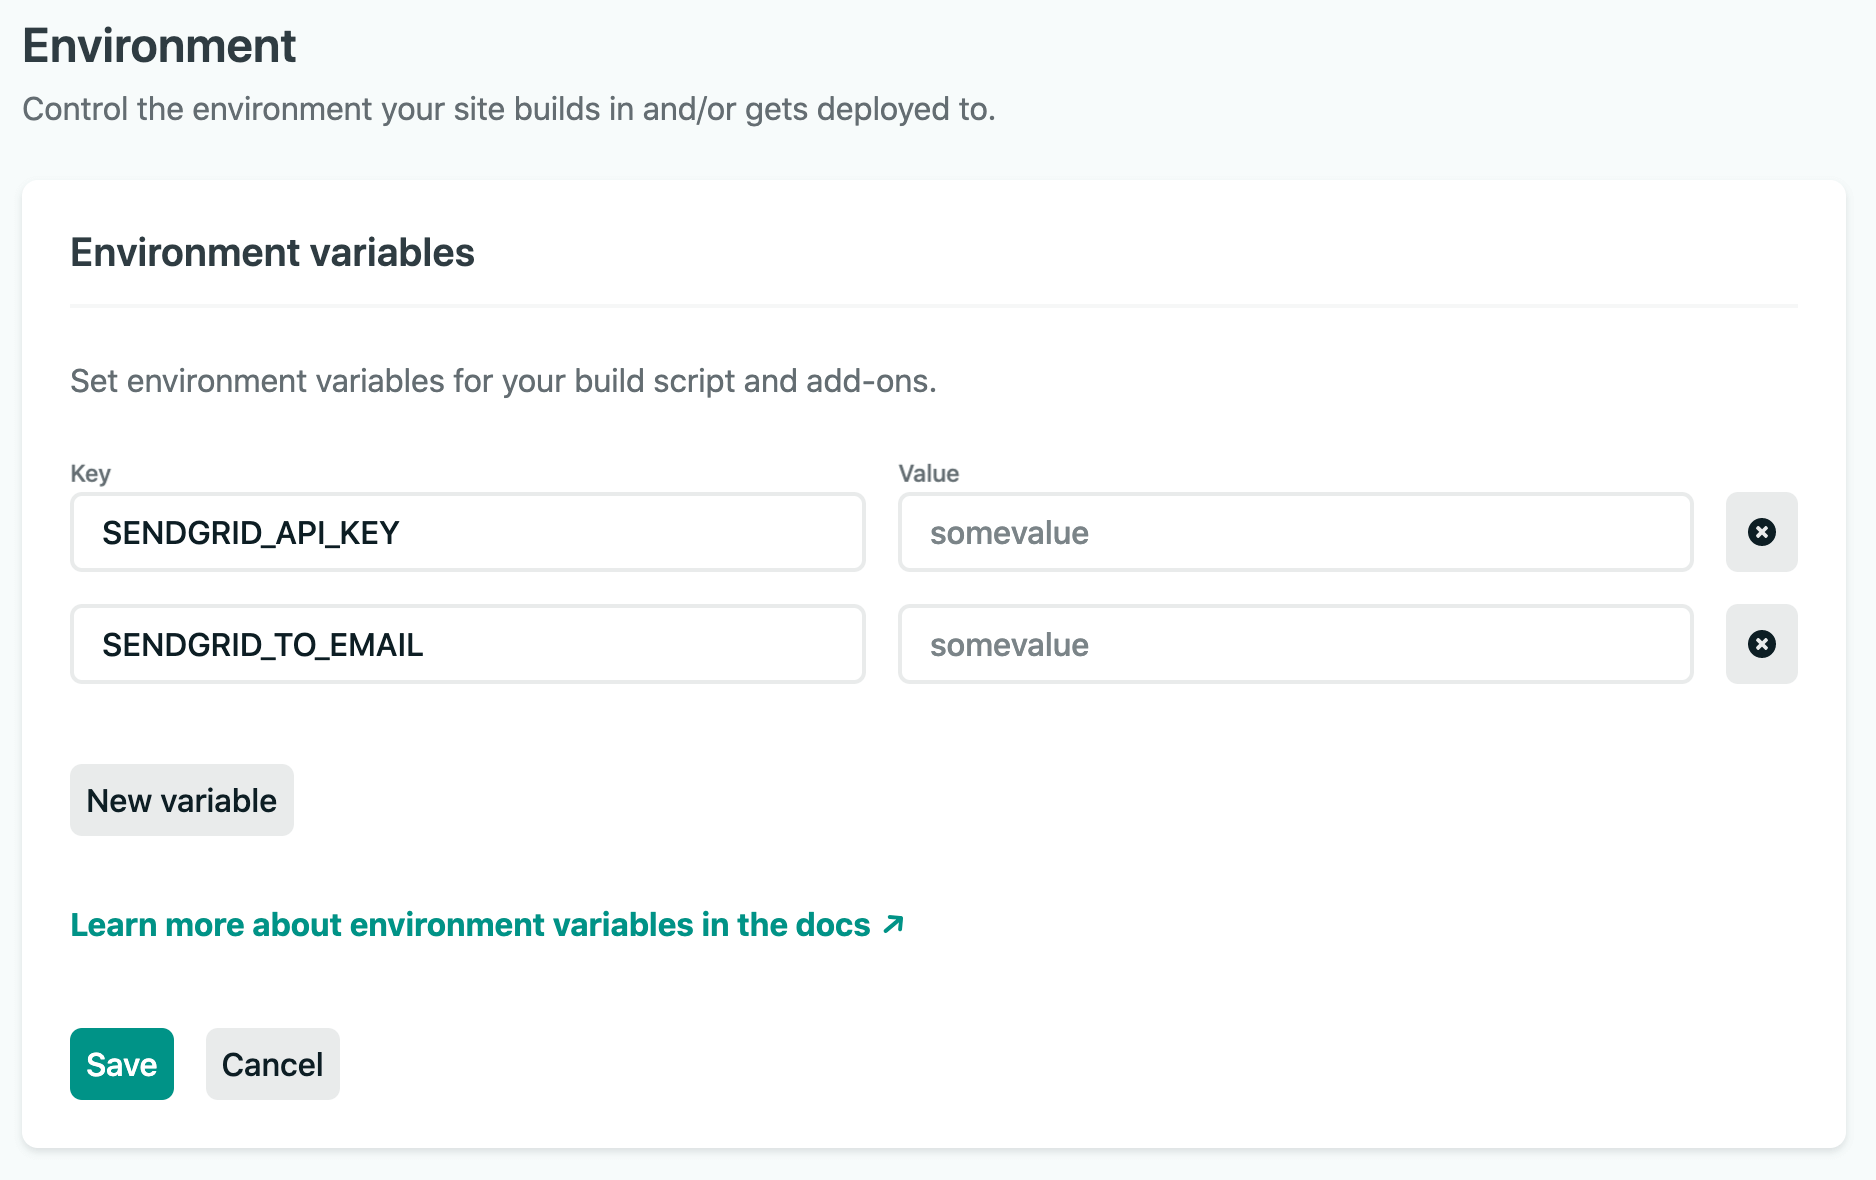 Form for setting environment variables in Netlify